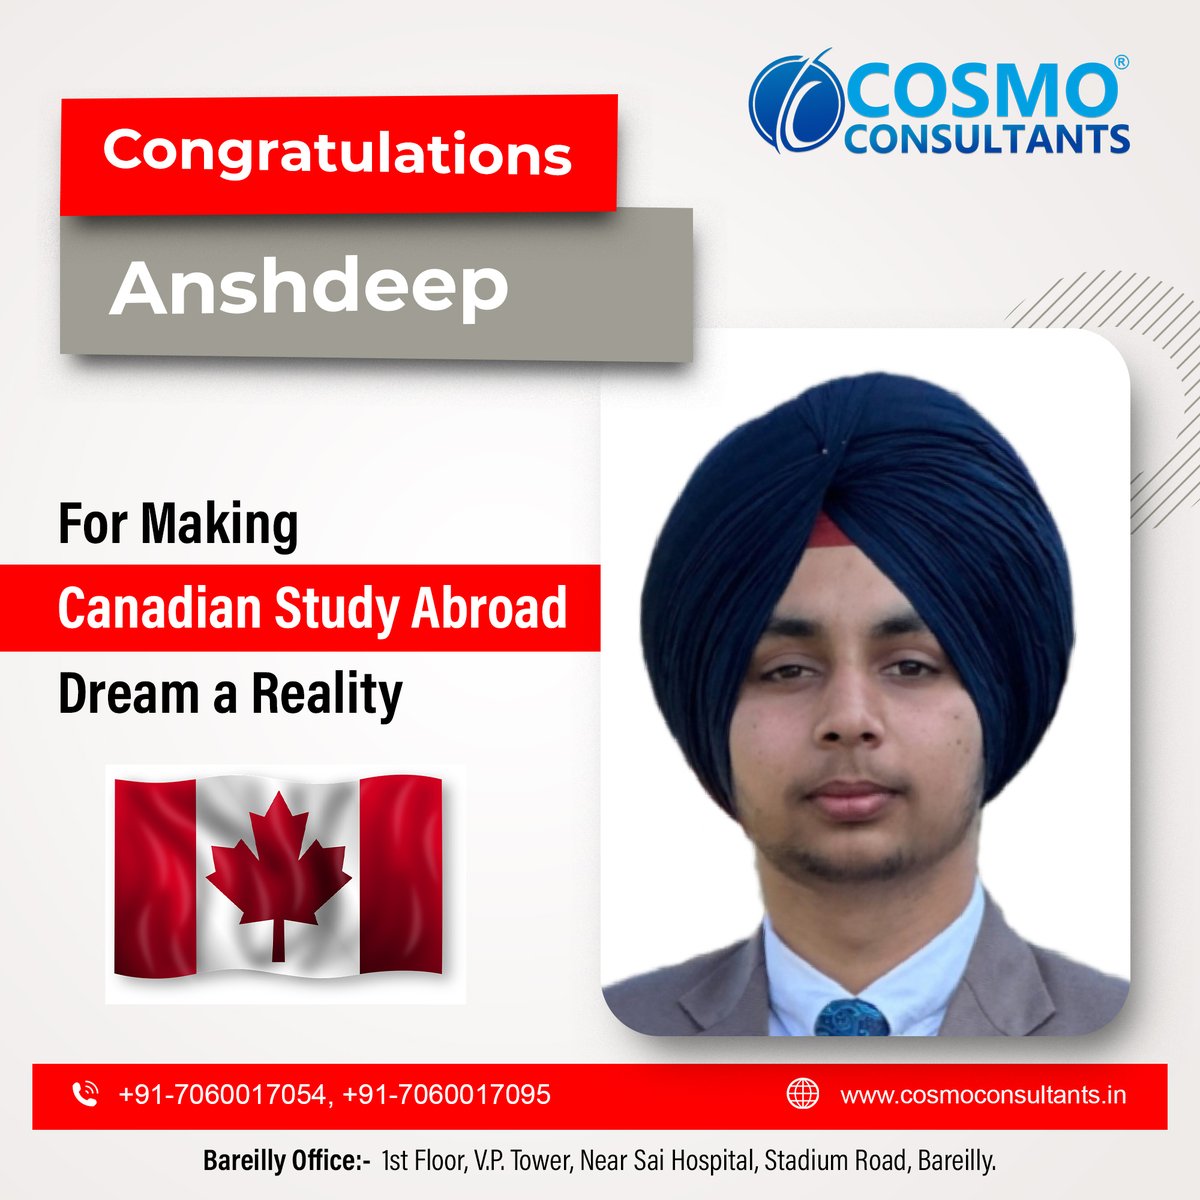 Congratulations 𝐌𝐫. 𝐀𝐧𝐬𝐡𝐝𝐞𝐞𝐩 for your study journey in Canada. Cosmo Consultants wishes you a very bright and successful career ahead.
For more information reach us: +91-7060017054, +91-7060017095.

#CosmoConsultants #Canada #StudyInCanada #StudyAbroad #studentvisa